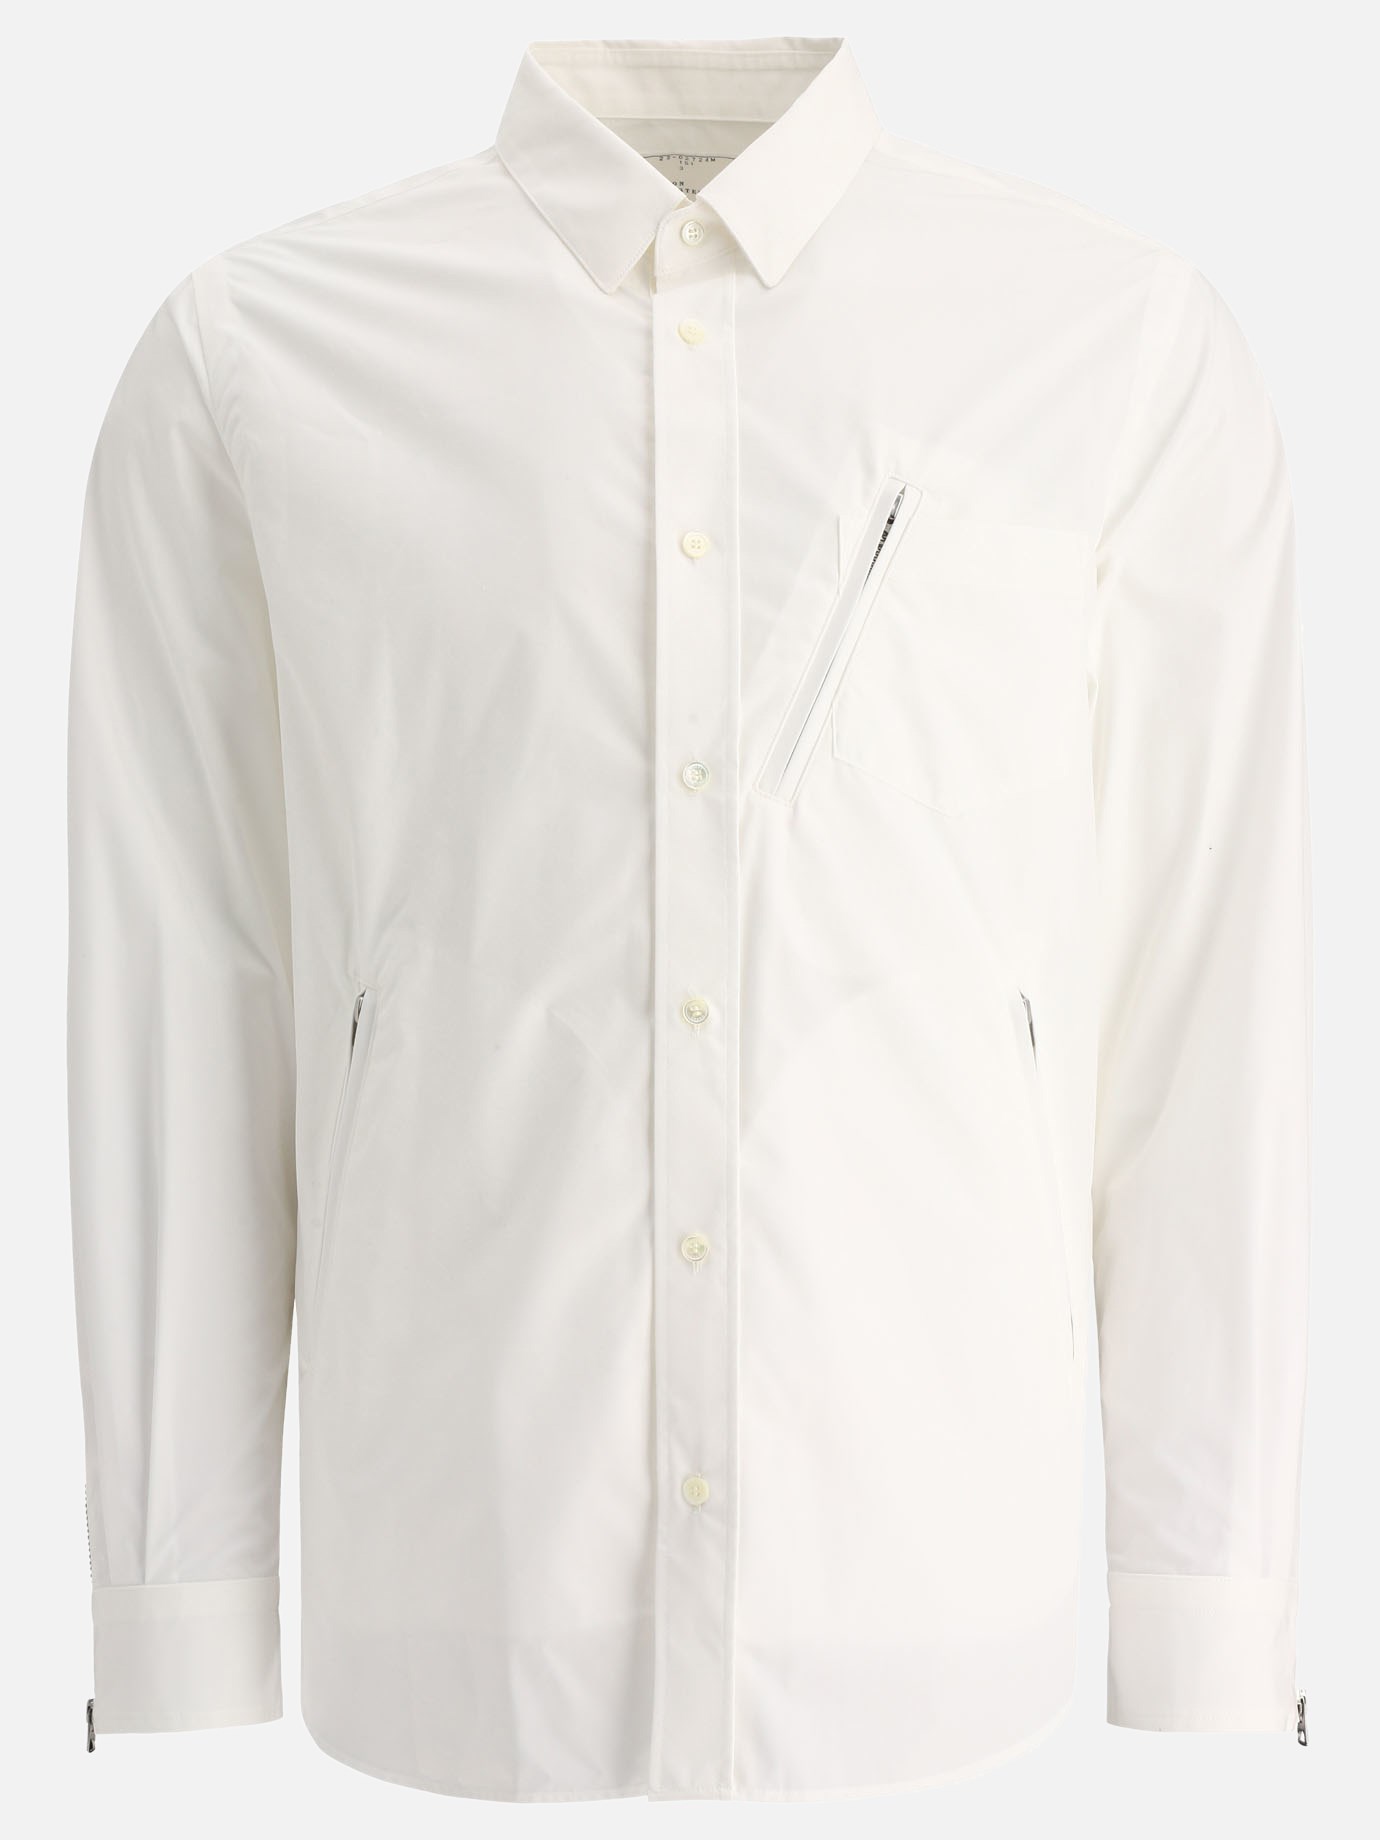 Shirt with zip detailsby Sacai - 4